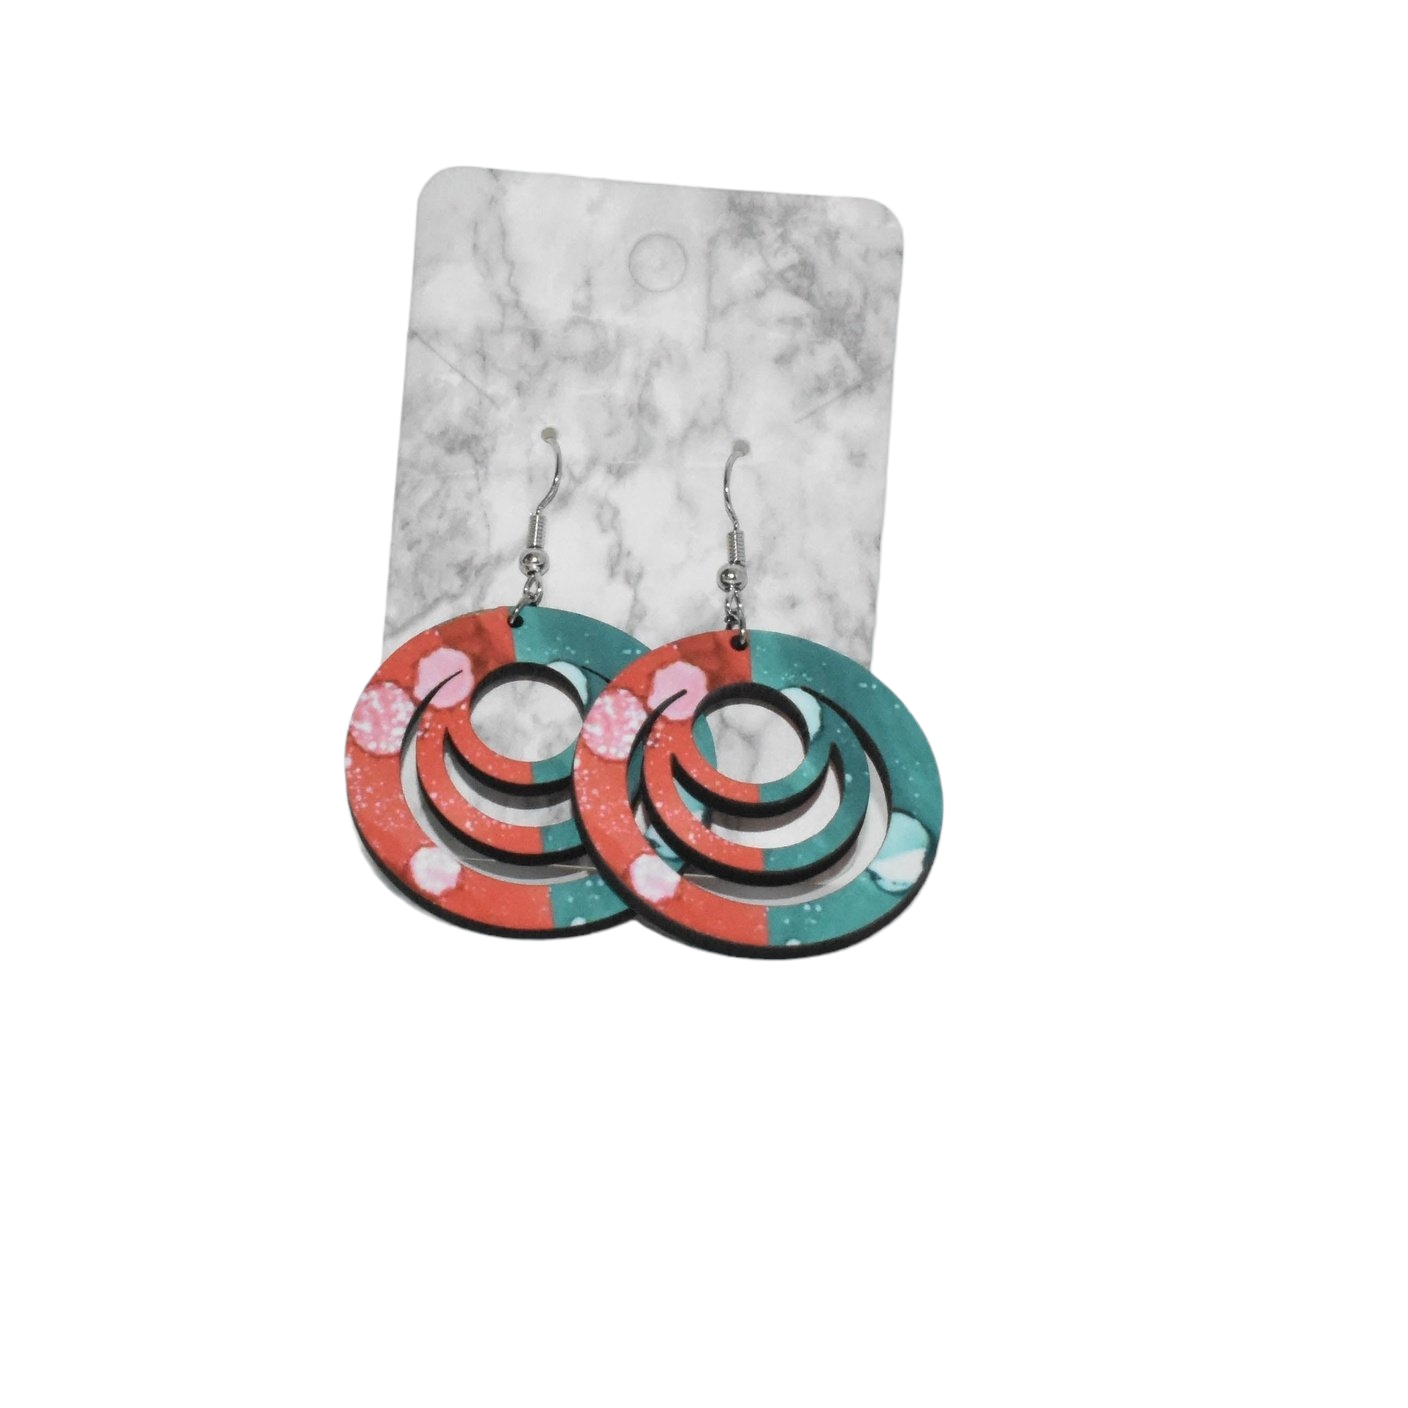 Cute and Colorful Earrings